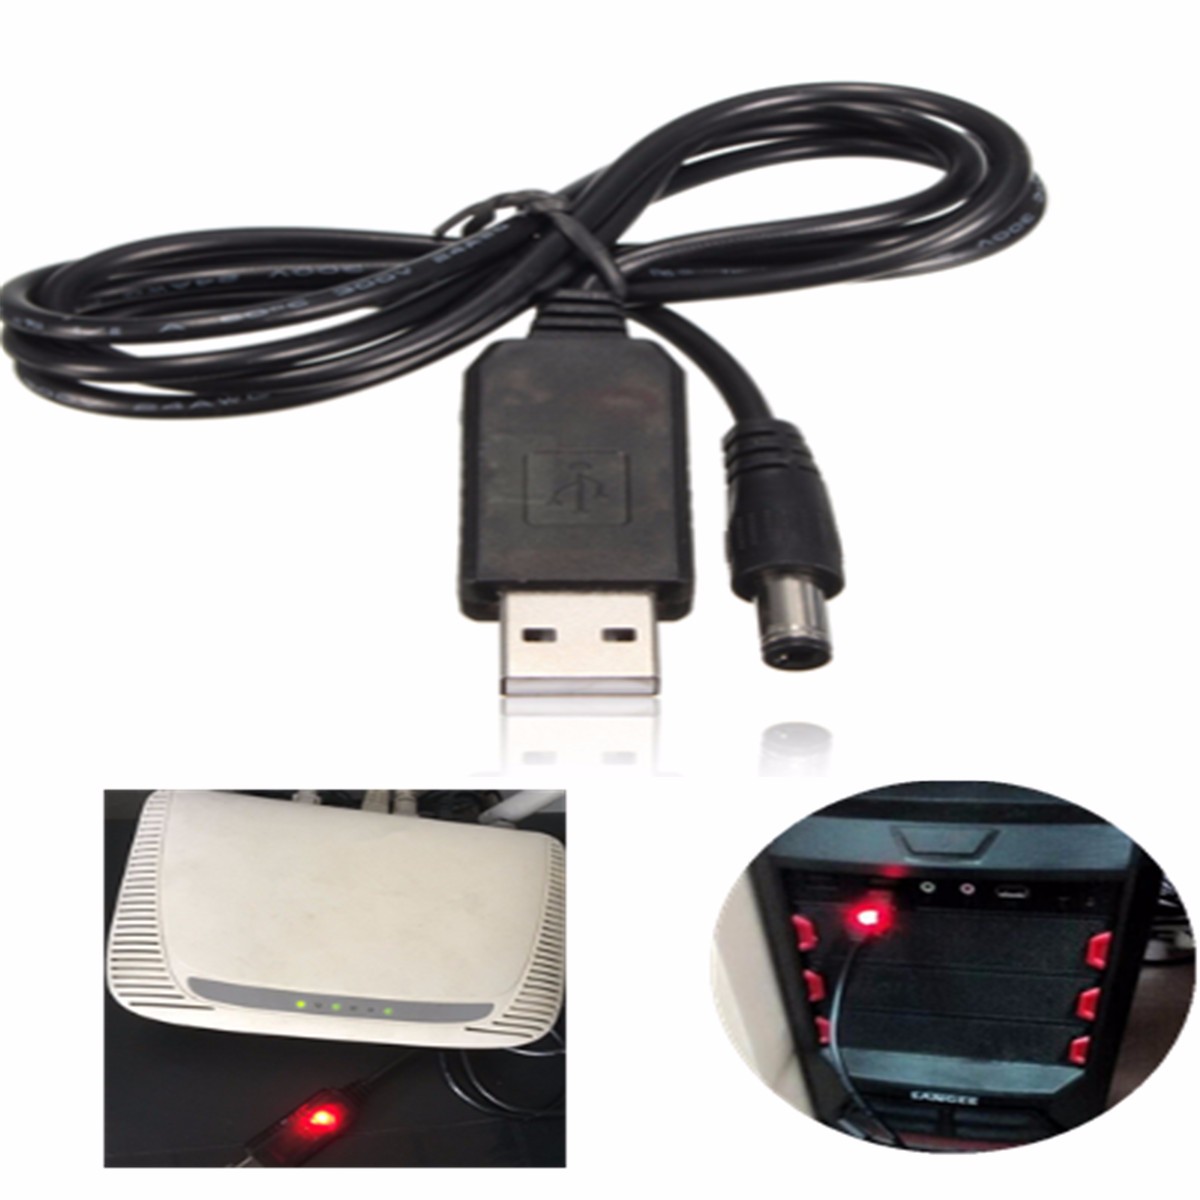 1m-5V-DC-To-12V-DC-USB-Power-Cable-Data-Adapter-Charger-Plug-with-LED-21mm-x-55mm-1052777